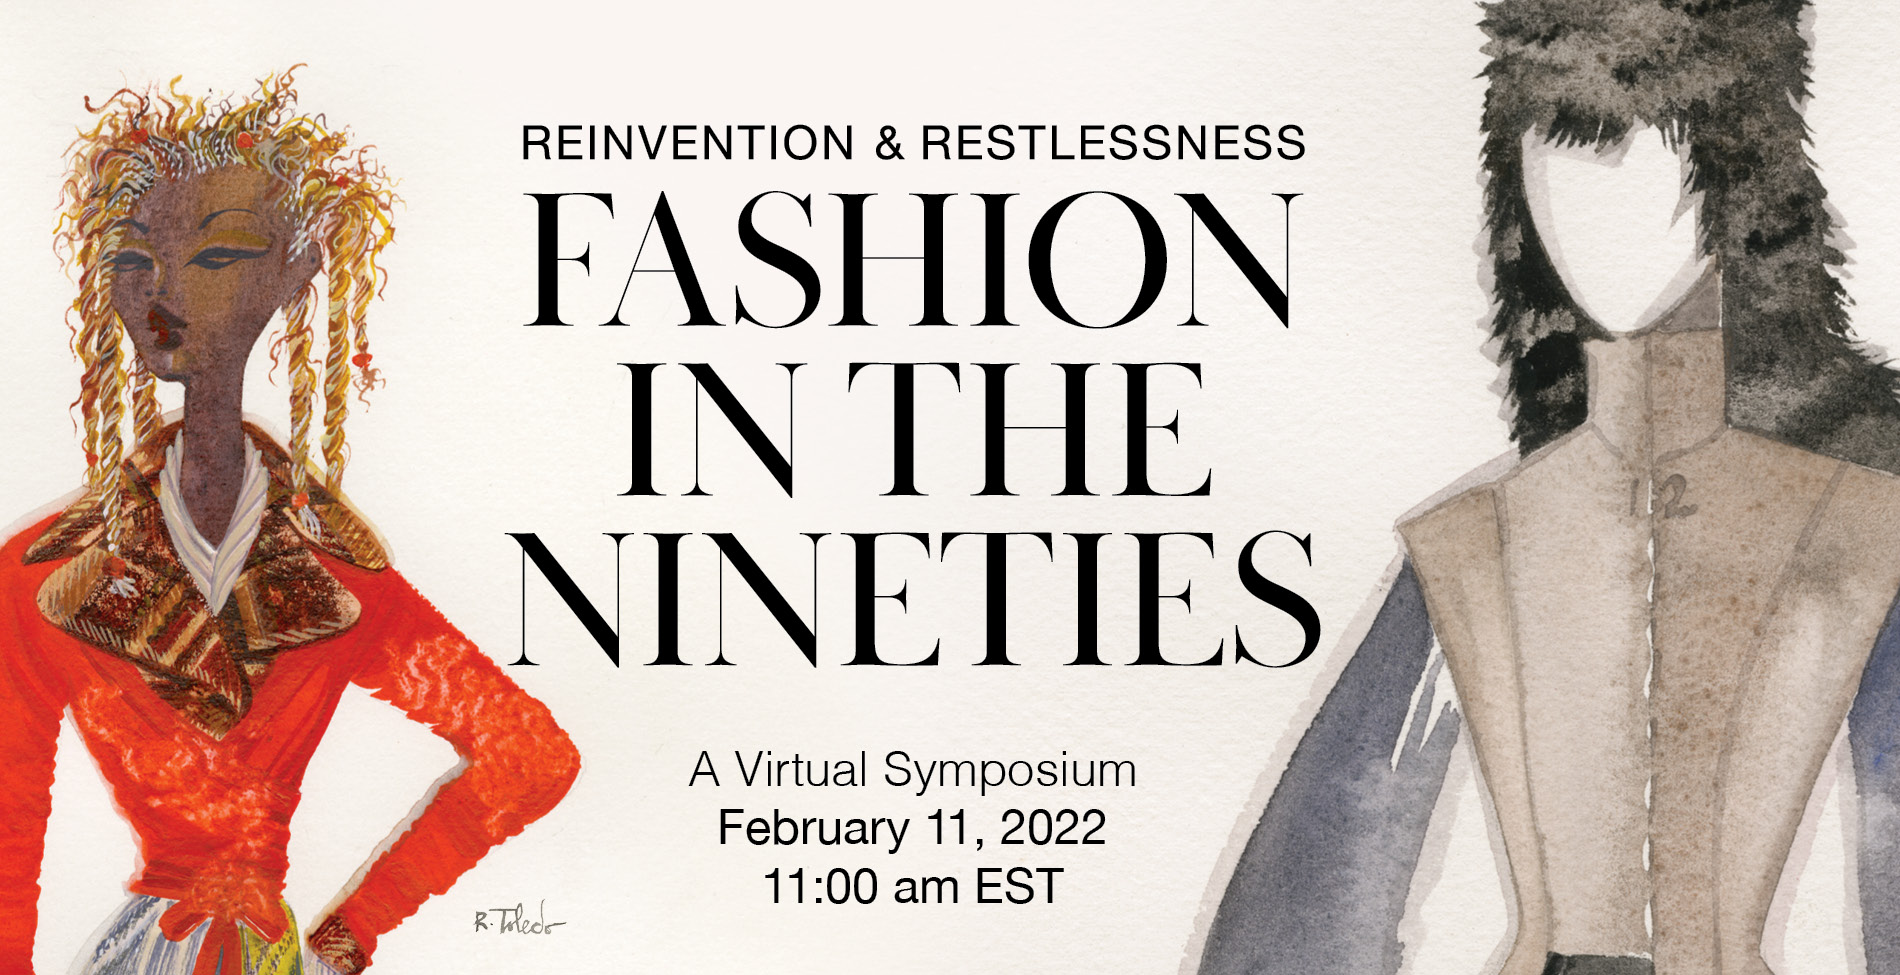 Reinvention and Restlessness: Fashion in the Nineties Virtual Symposium